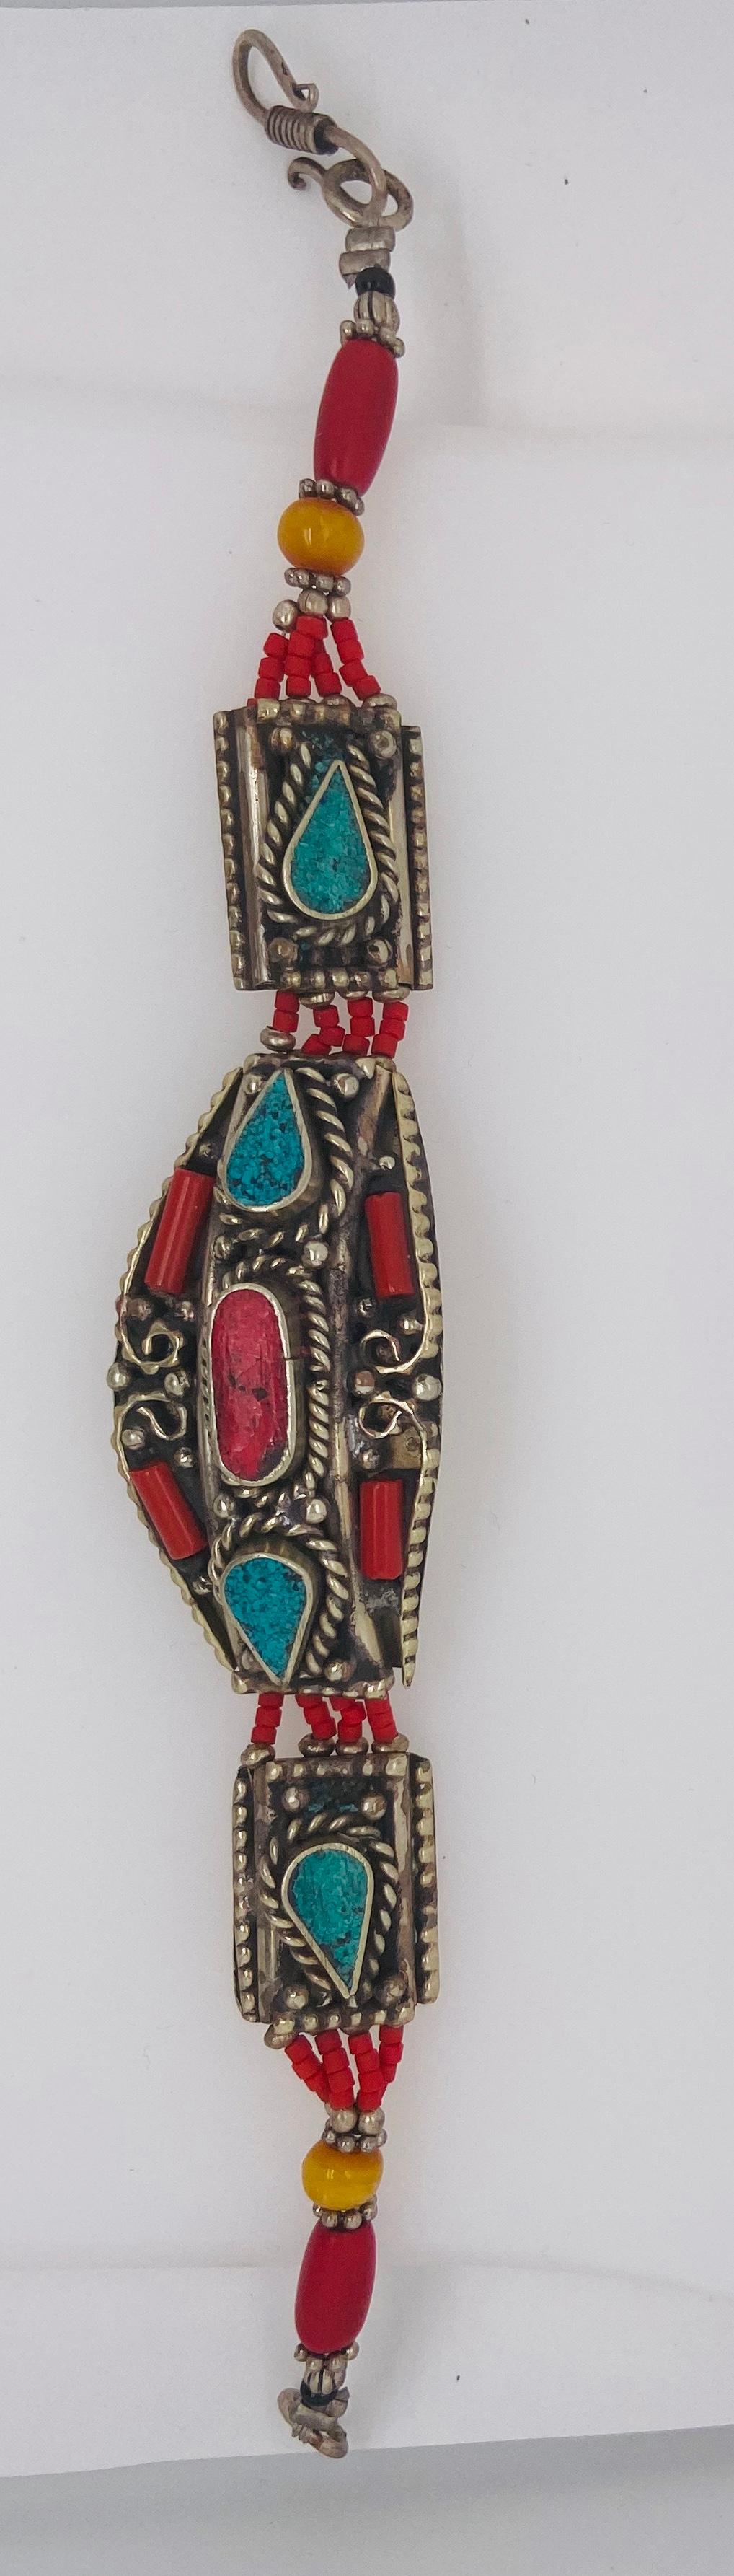 Midcentury Moroccan Tribal Silver Bracelet with Turquoise and Red Stones For Sale 9